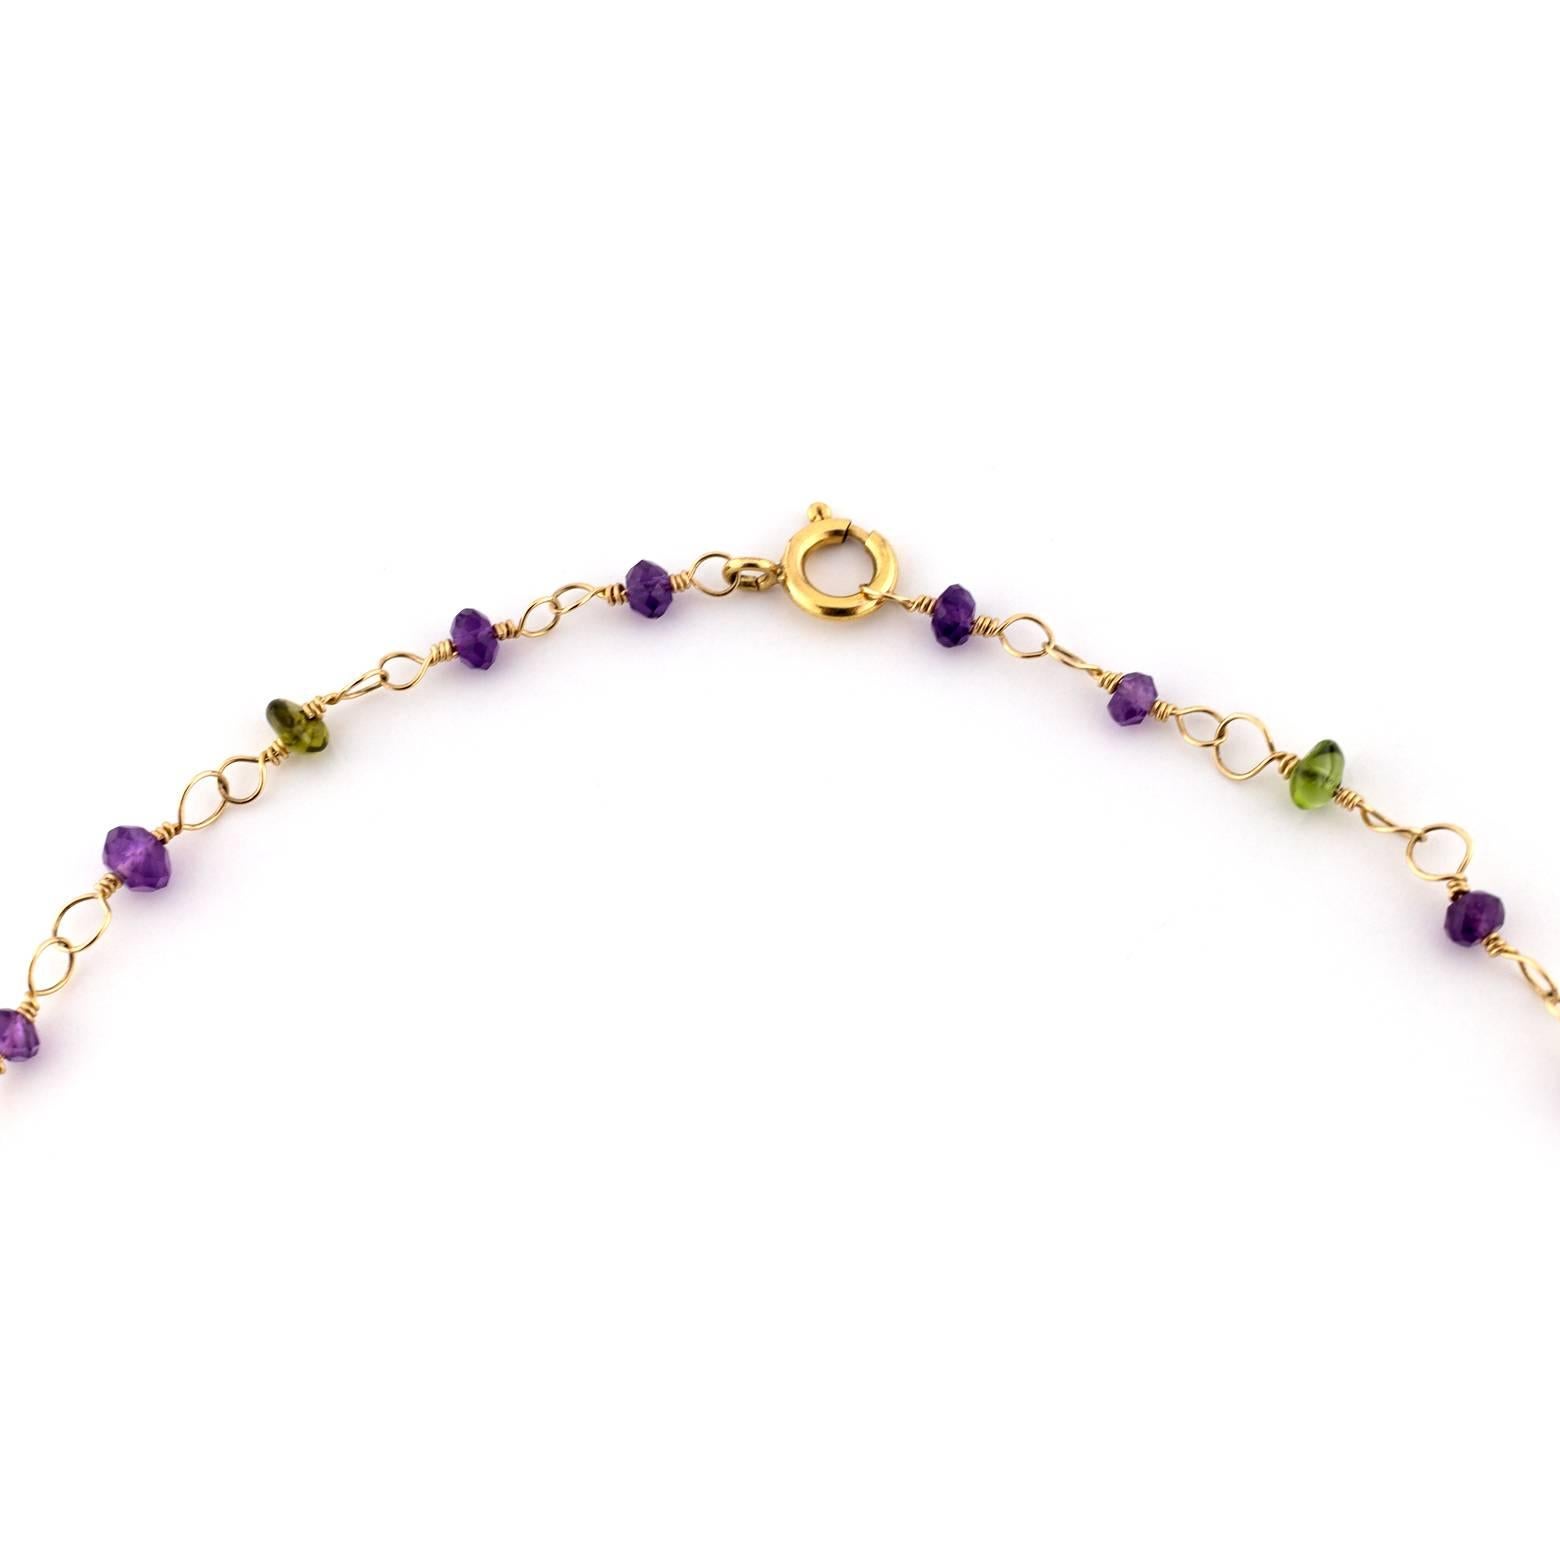 Women's Yellow Gold Filled Necklace with Briolette Amethysts and Briolette Peridots For Sale